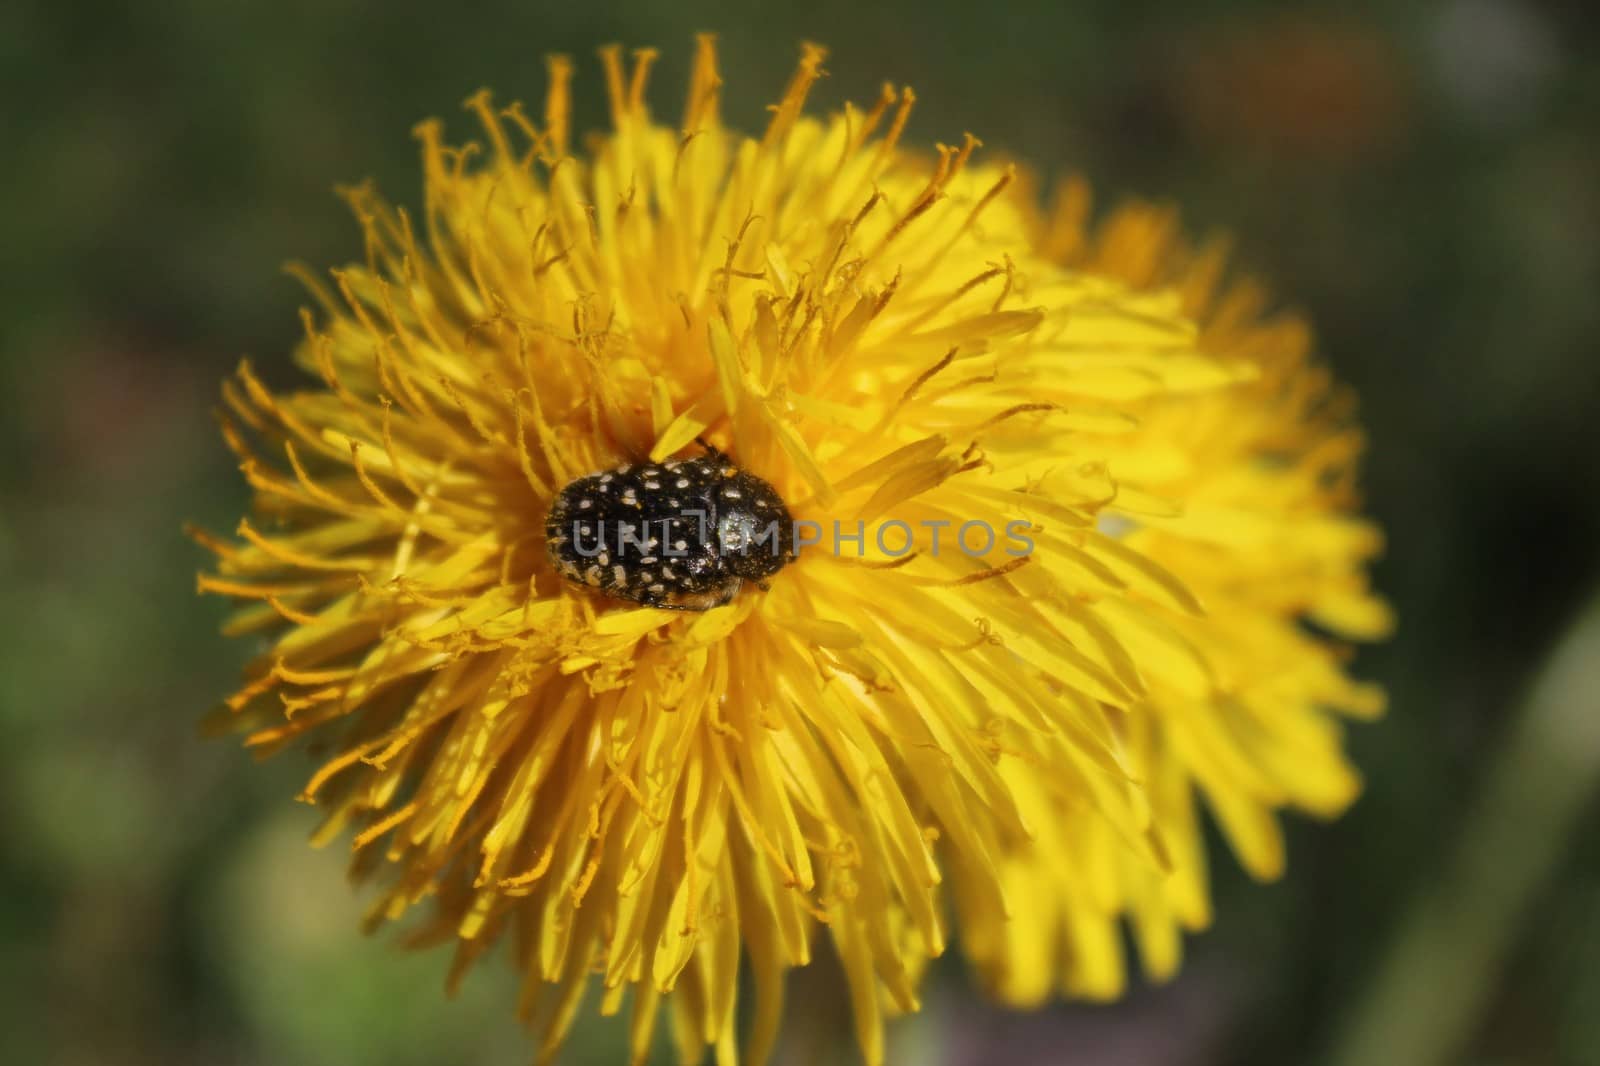 The picture shows a rose chafer on a dandelion blossom